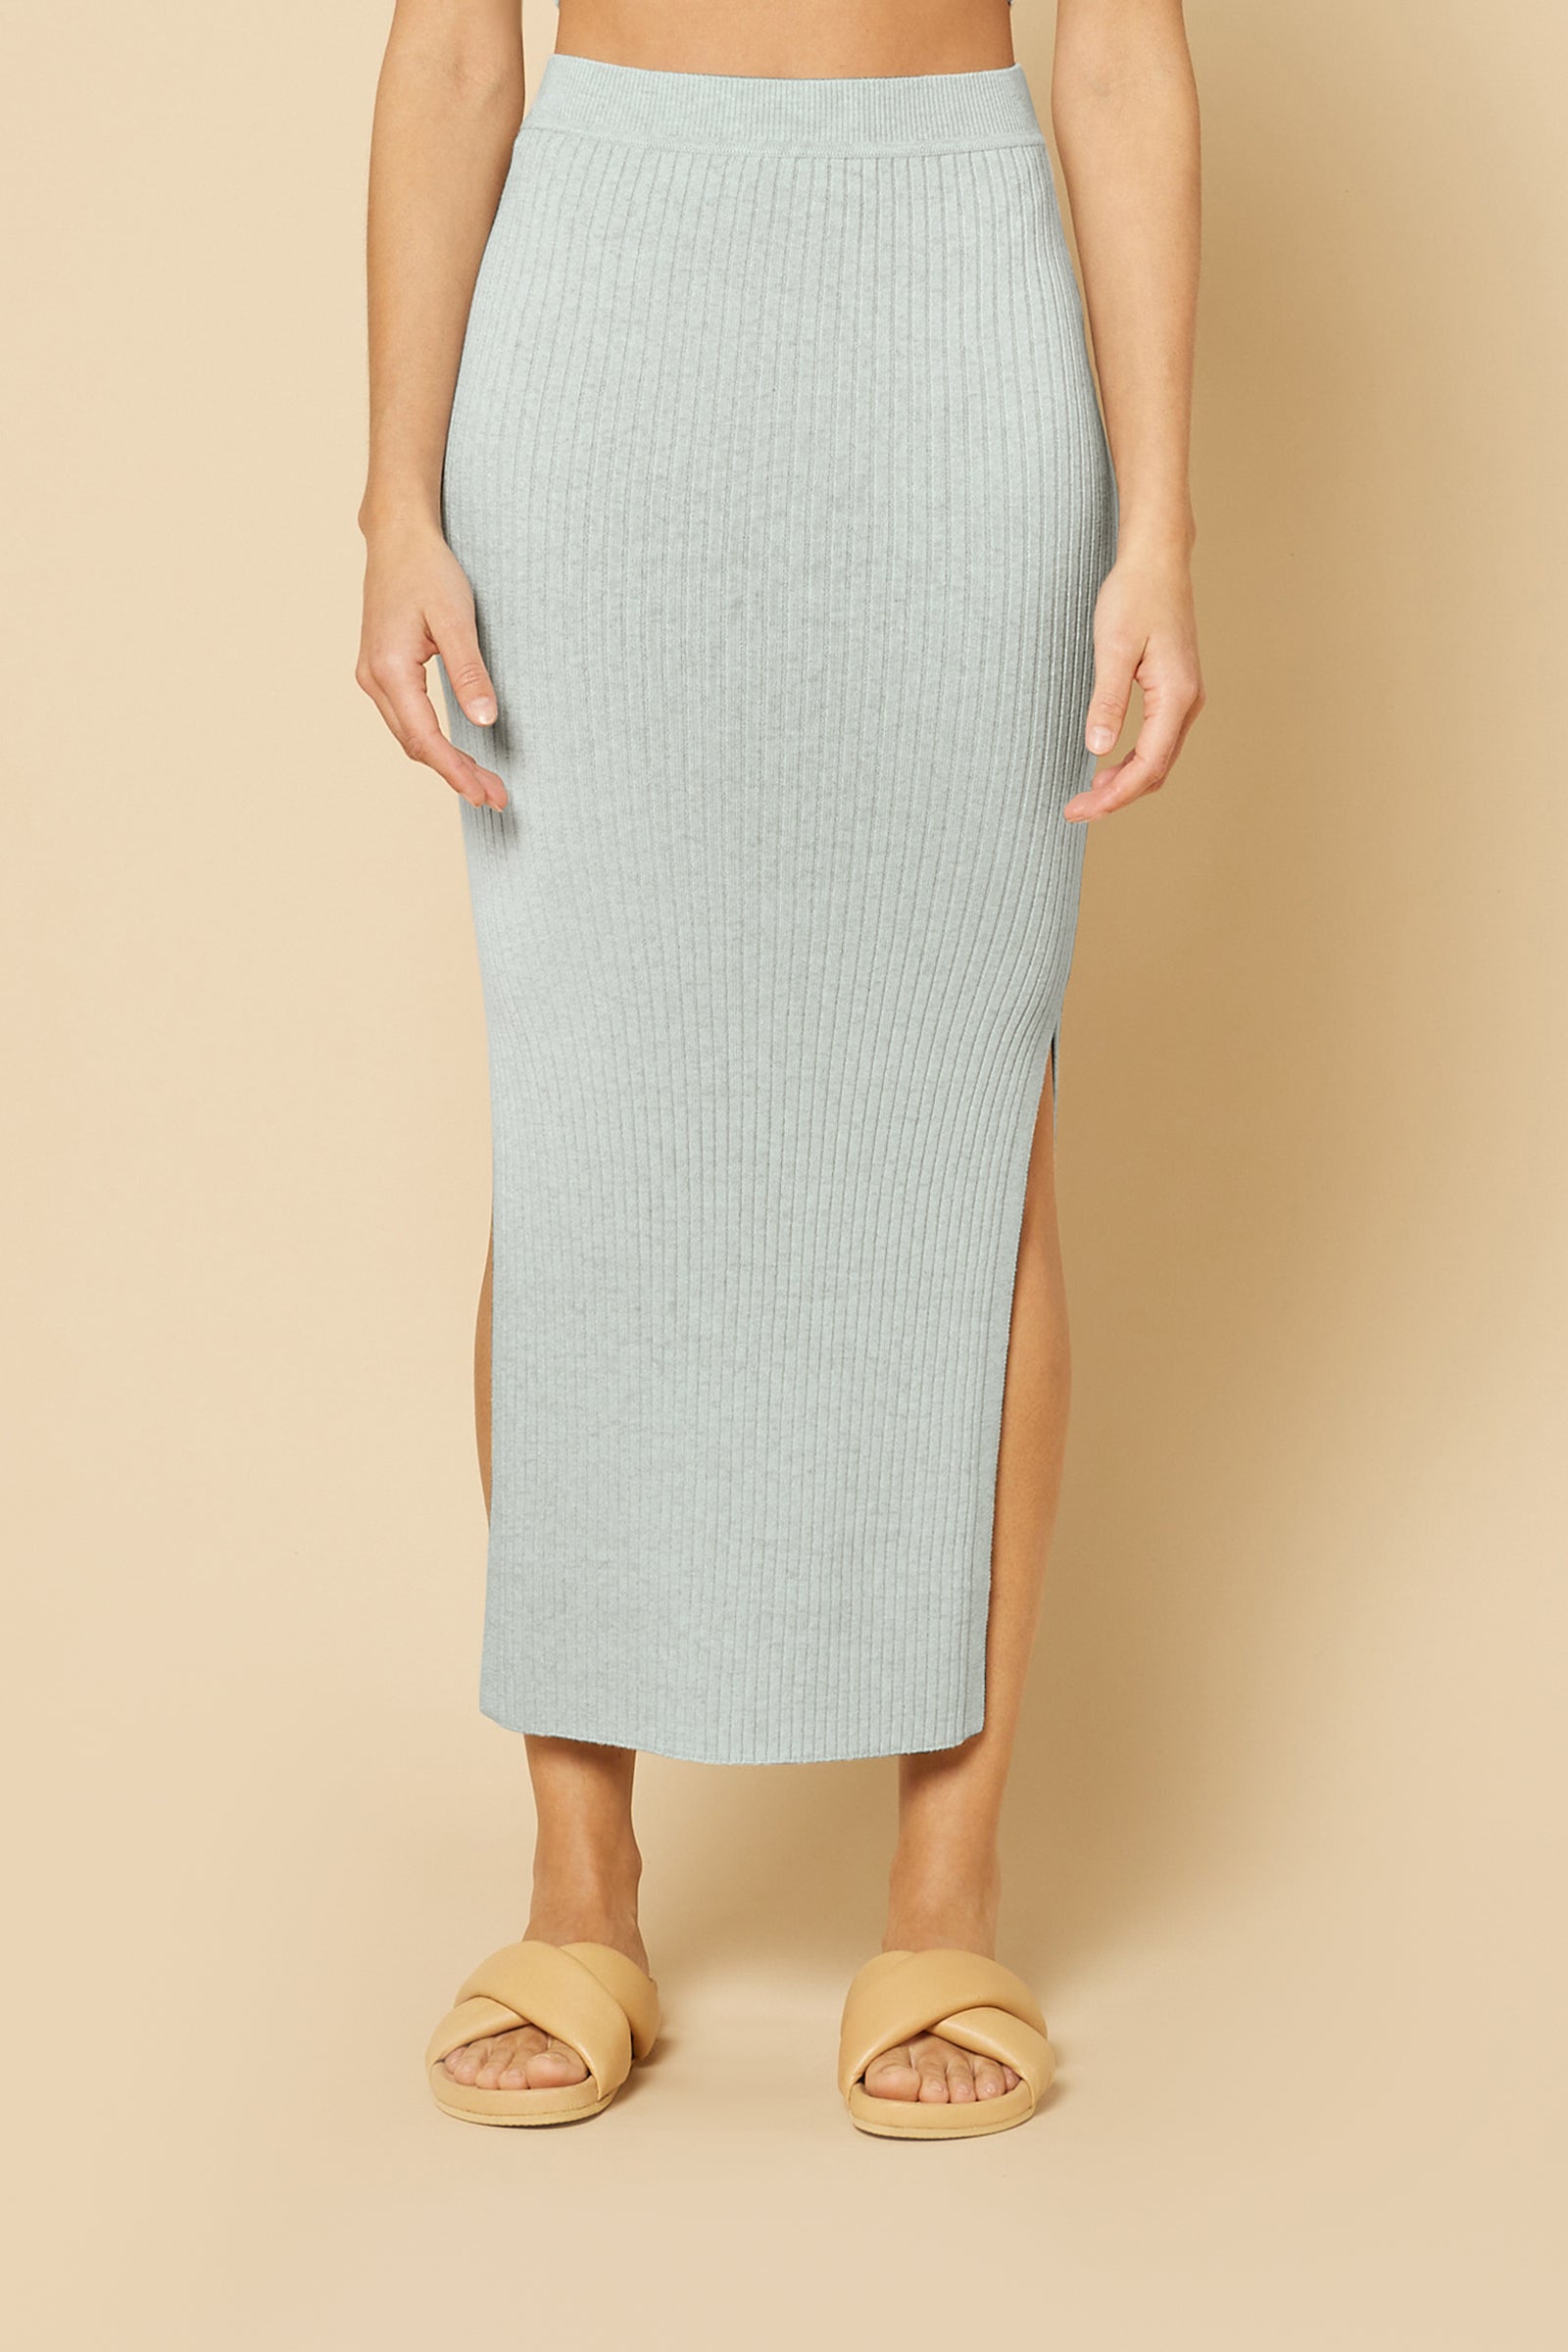 Nude Lucy Harlow Knit Midi Skirt in a Ice White Colour